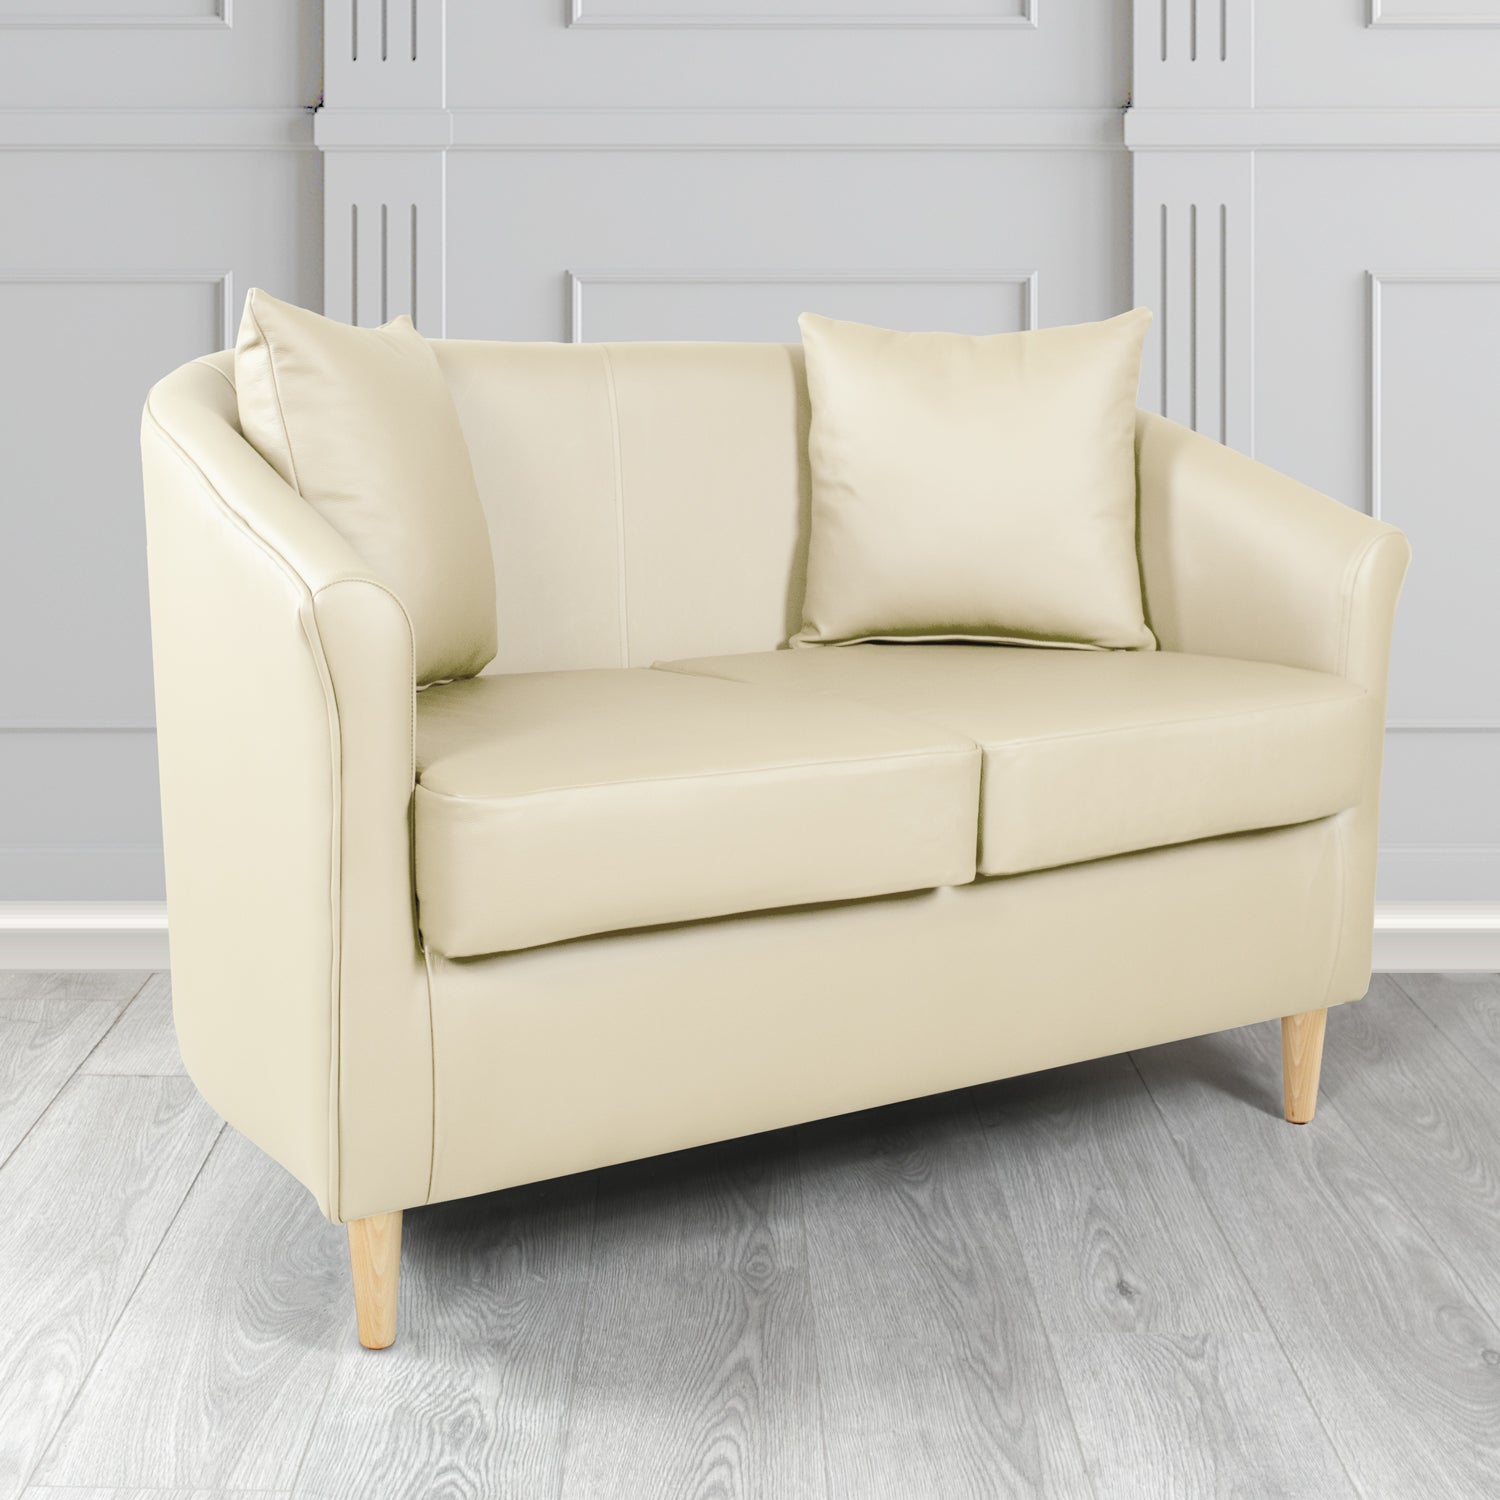 St Tropez 2 Seater Tub Sofa in Madrid Cream Faux Leather - The Tub Chair Shop